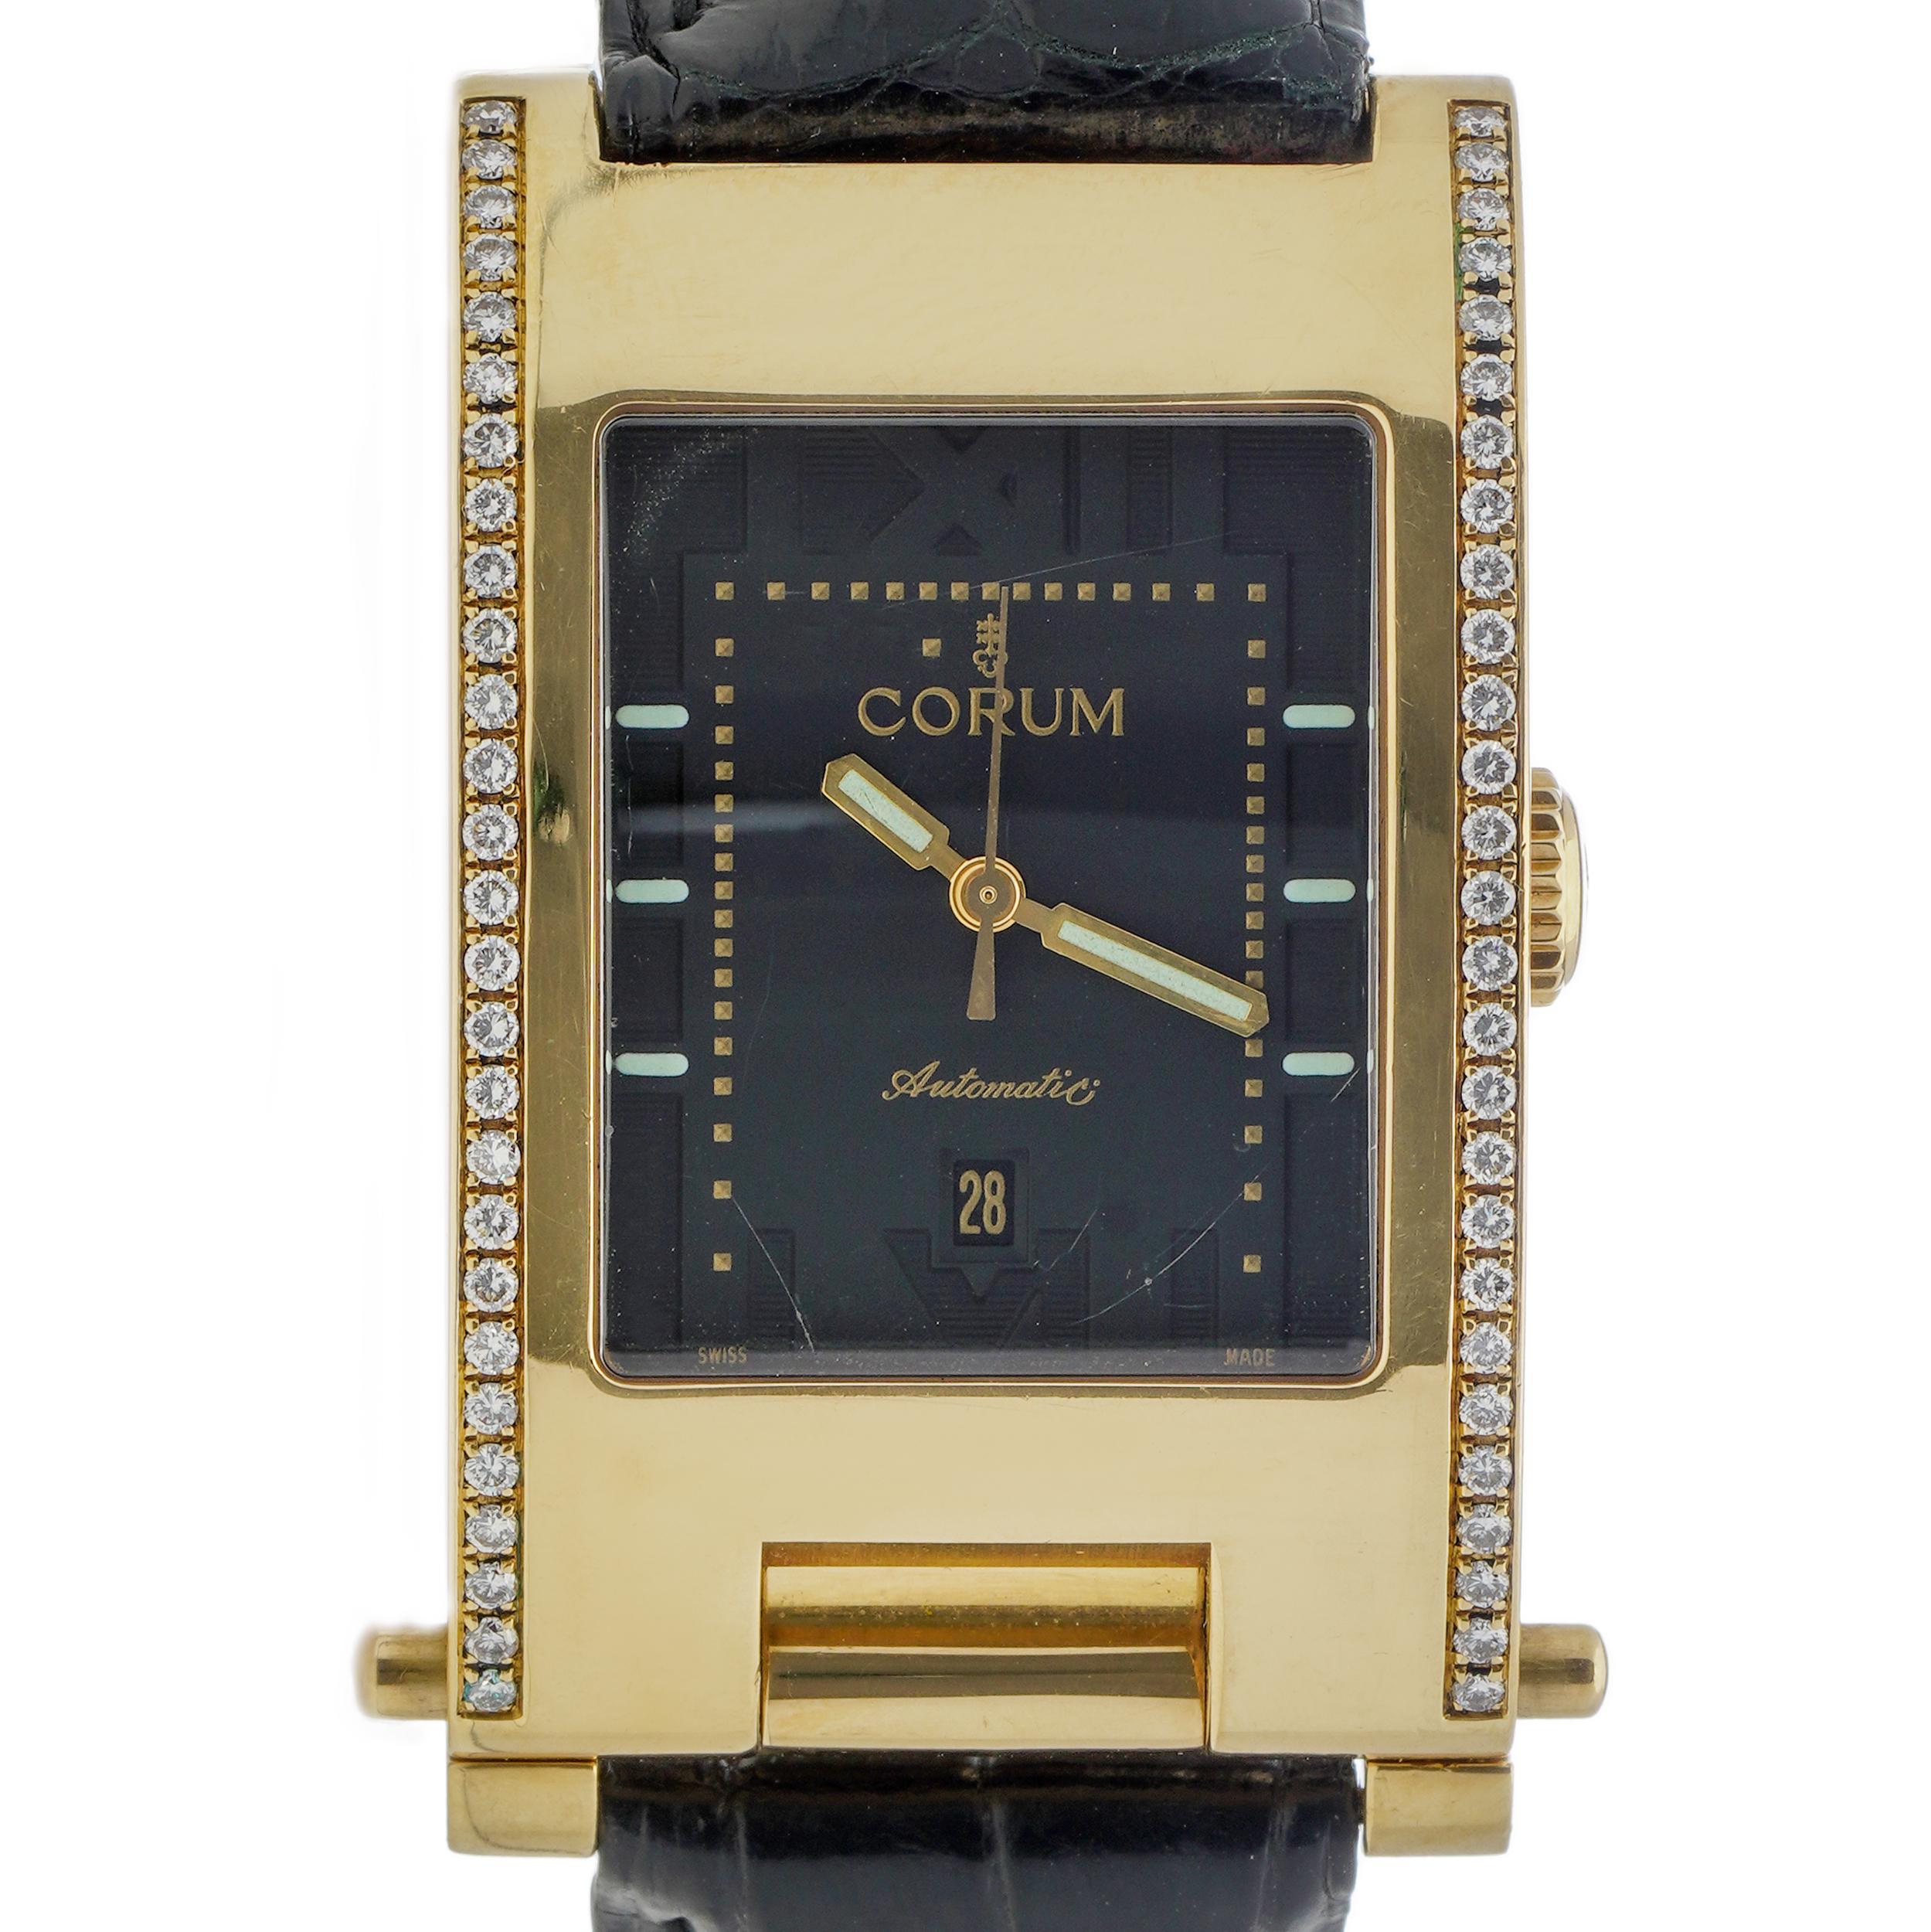 CORUM TABOGAN/ table watch model 18kt. yellow gold and diamonds unisex wristwatch with the original leather strap. 

Item Specifics:
Bracelet material: Black leather
Movement: Automatic 
Strap Colour: Black 
Dial Colour: Black
Clasp: Buckle
Clasp